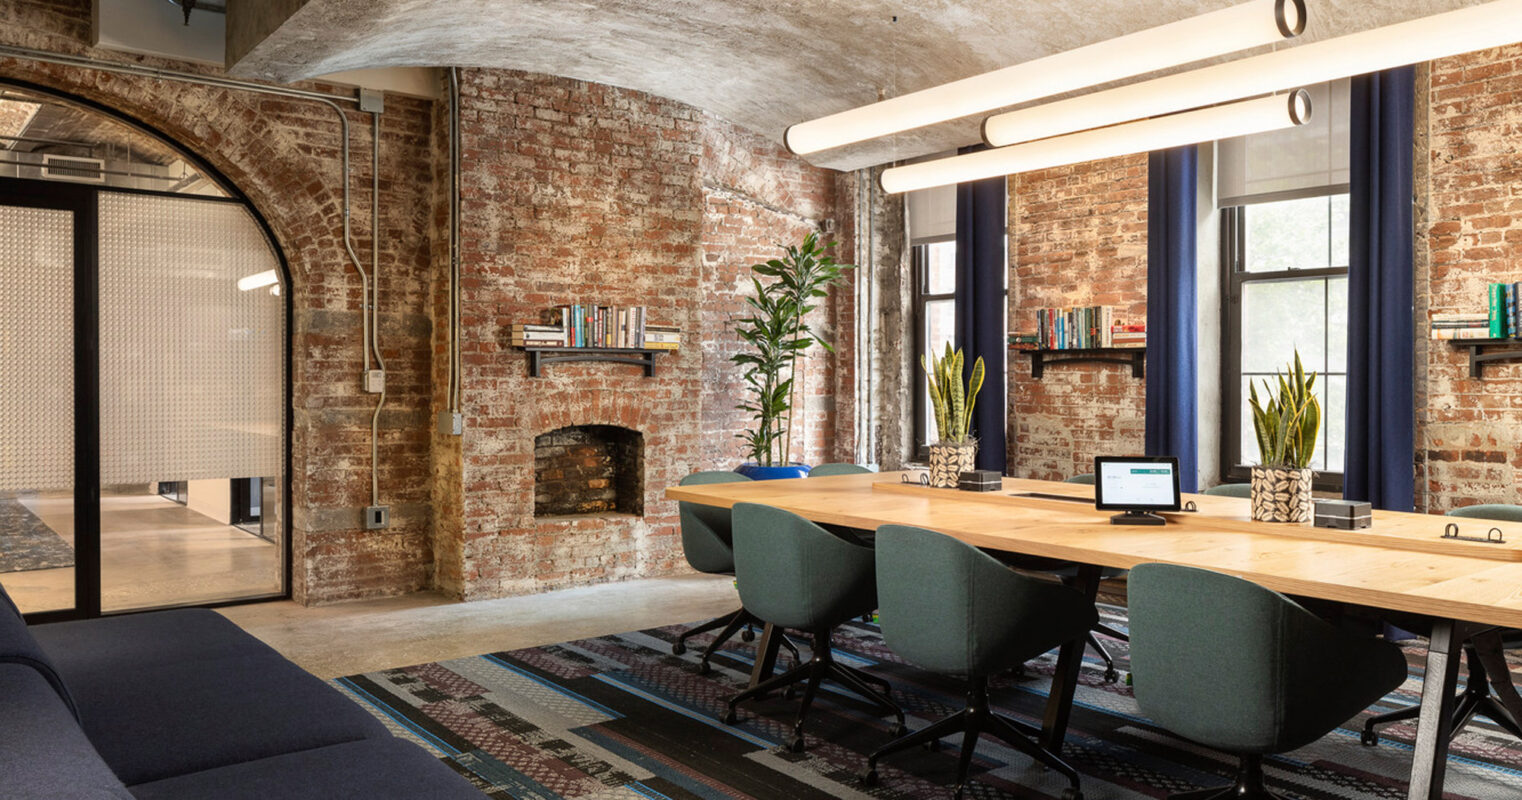 Modern office space blending industrial and contemporary design elements, featuring exposed brick walls, arched ceilings, and large windows complemented by sleek furnishings and patterned area rugs.